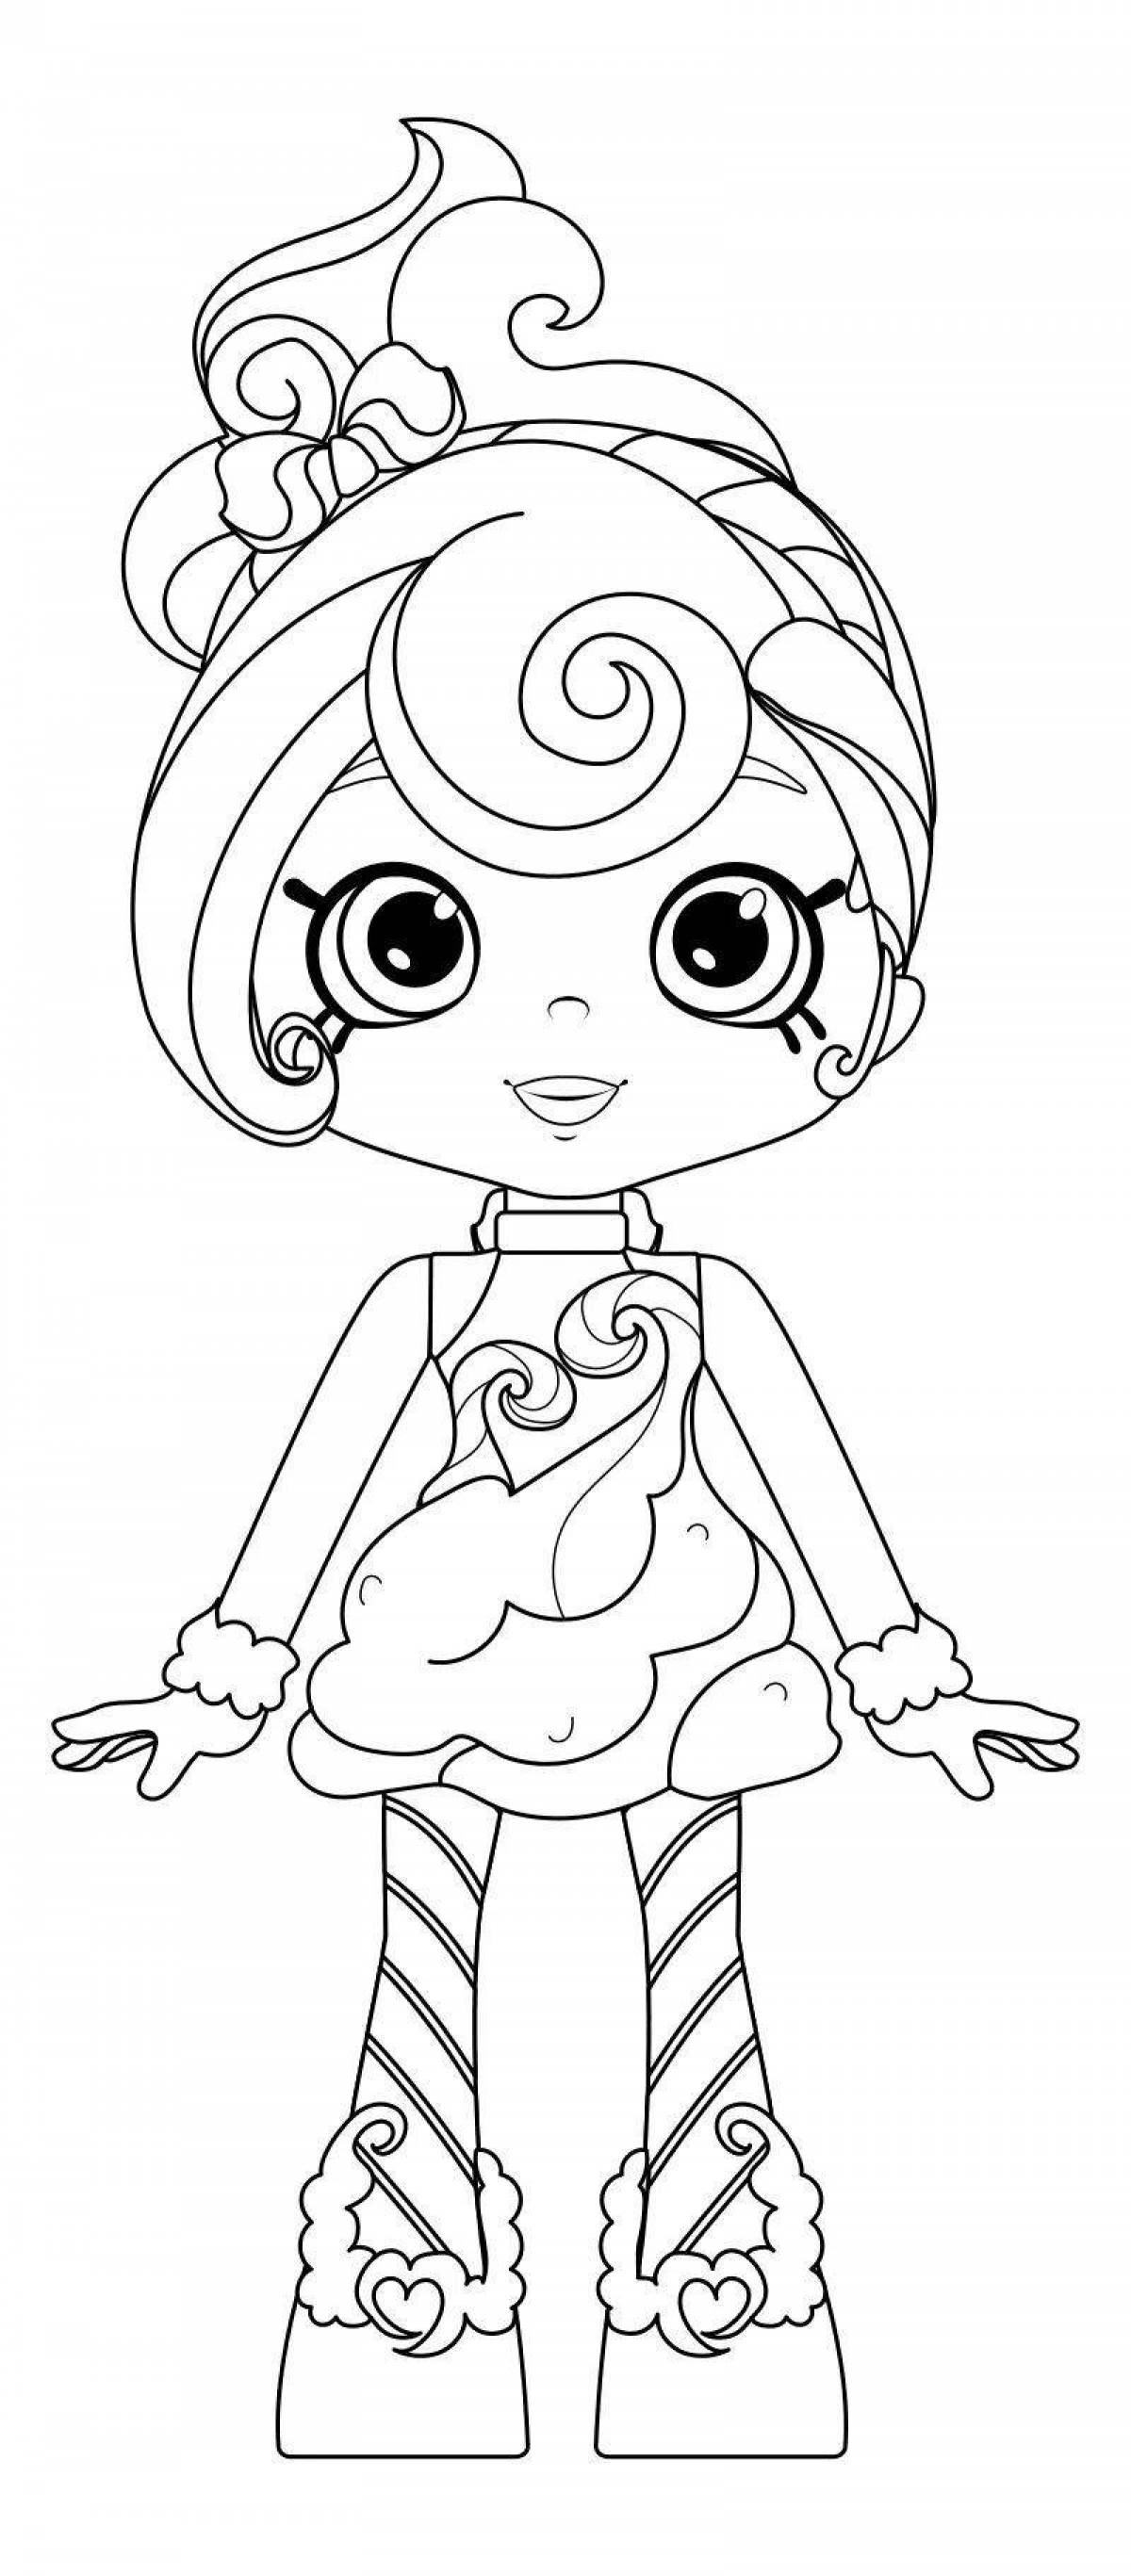 Fabulous candy coloring pages for kids